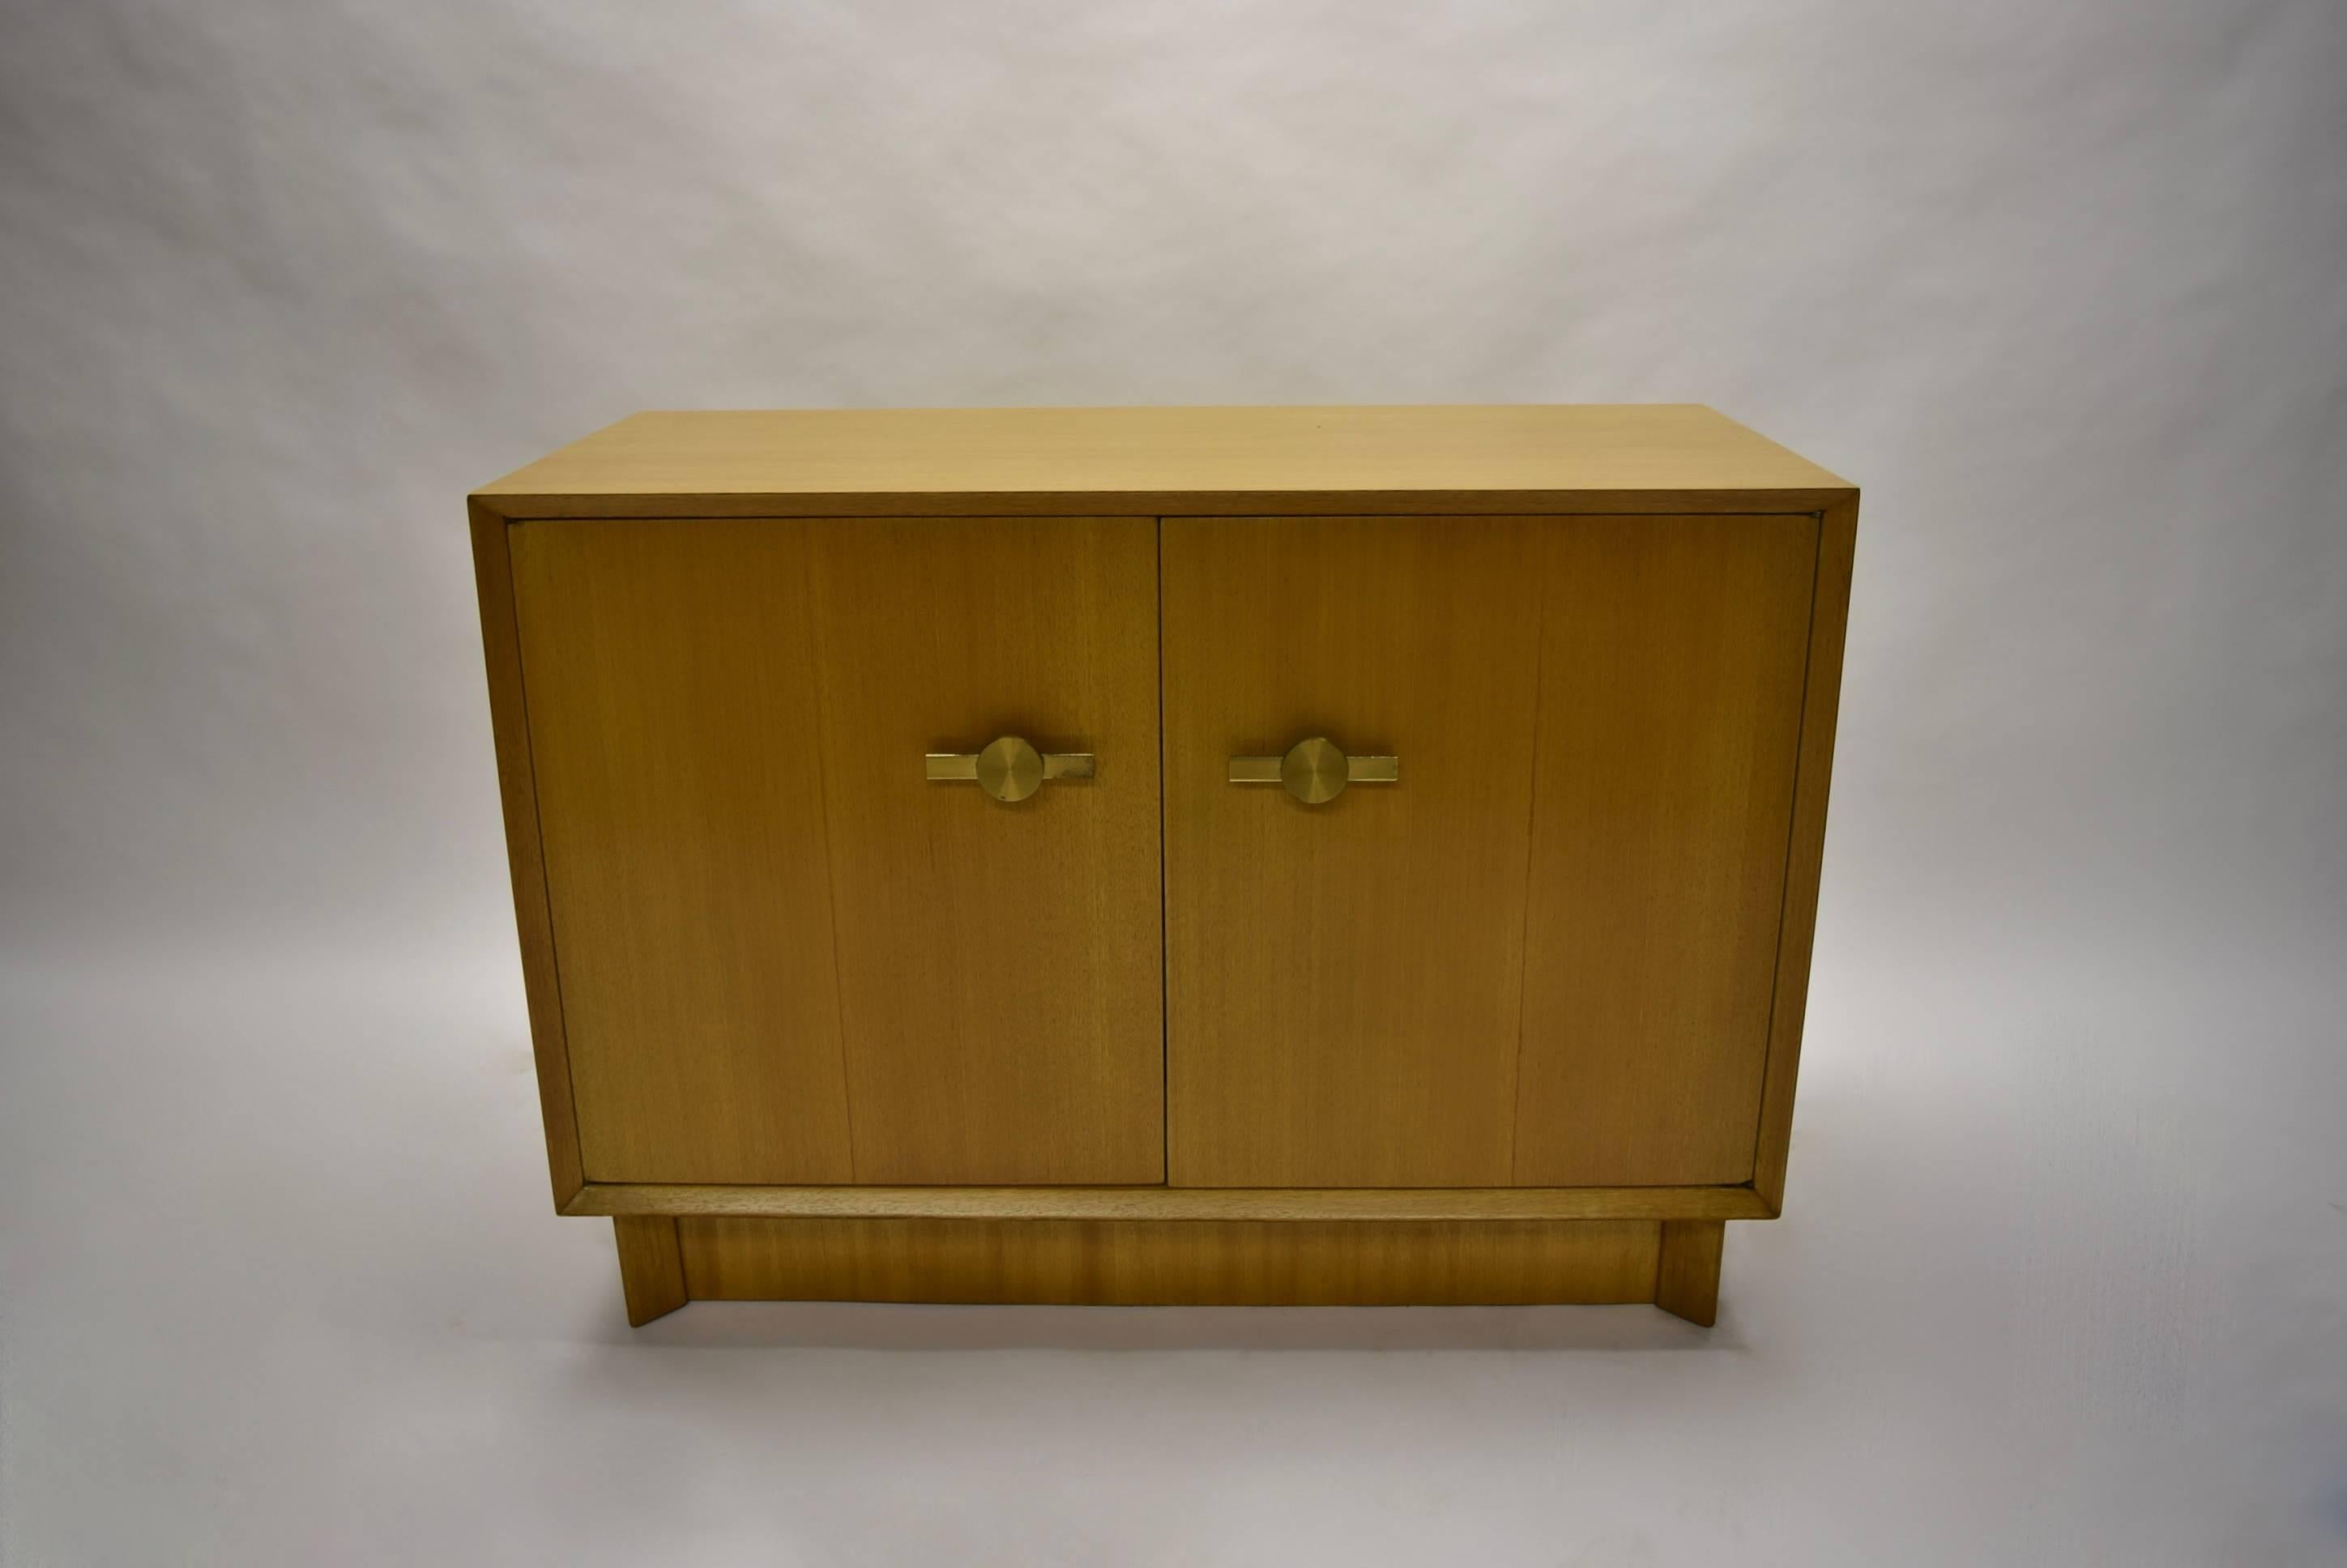 Pair of cabinets both with two doors and matching solid brass pulls. One cabinet opens to reveal four centre drawers flanked by a single shelf on either side. The second opens to a single adjustable shelf. Both have been completely refinished.